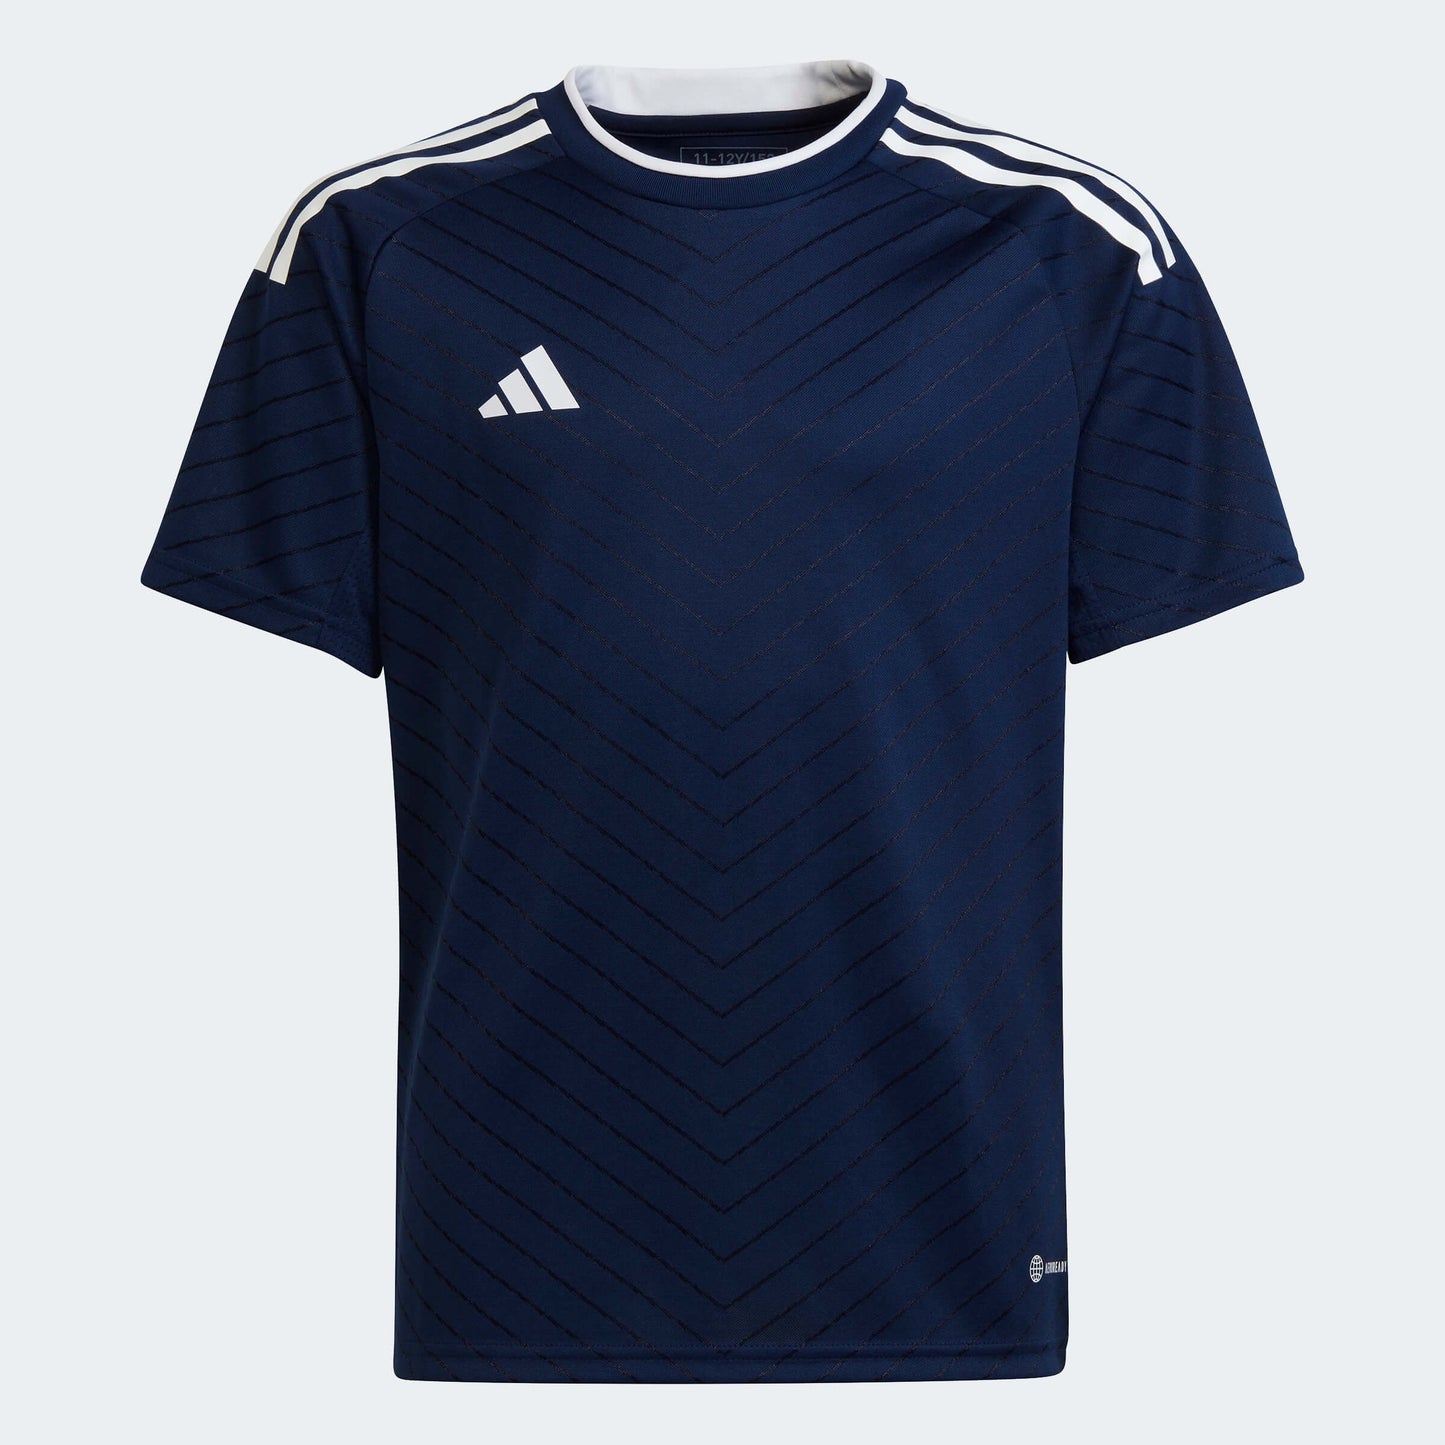 adidas YOUTH Campeon 23 Jersey Team Navy Blue 2 (Front)